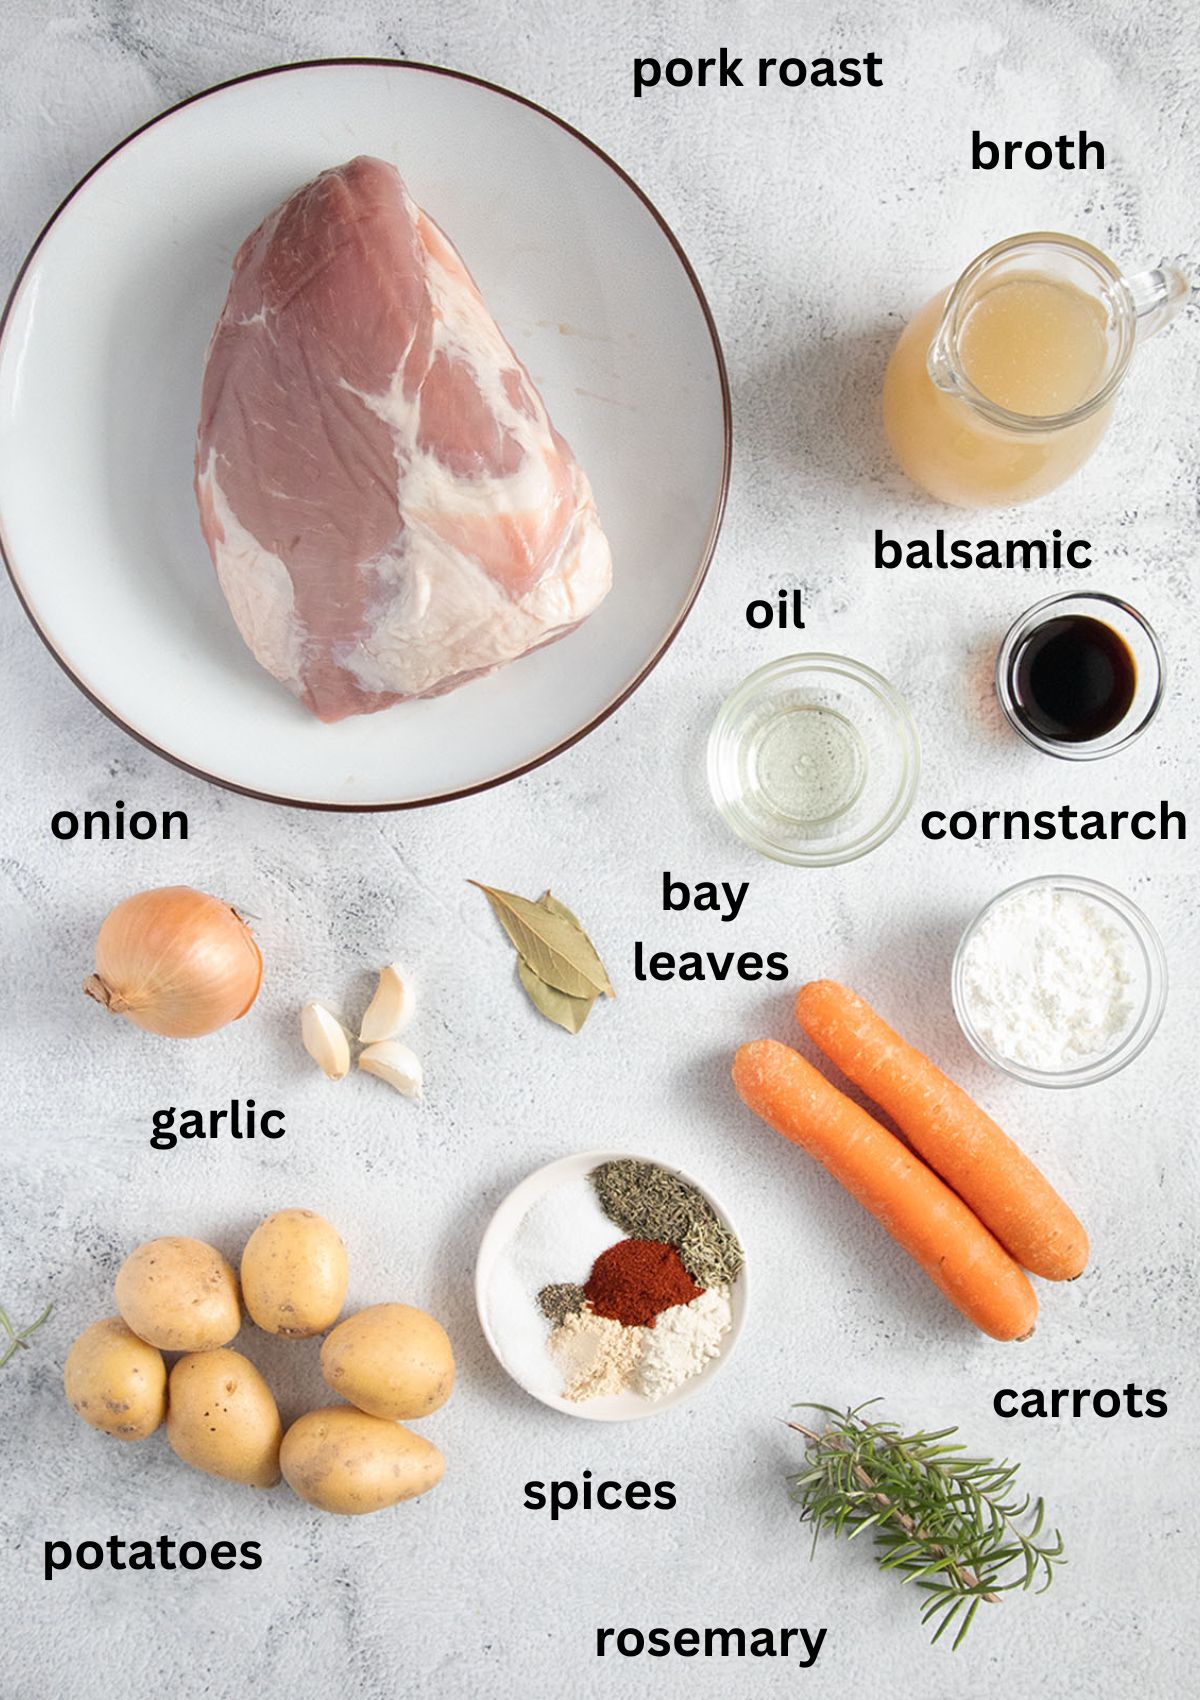 listed ingredients for making pork roast with potatoes, carrots and gravy.